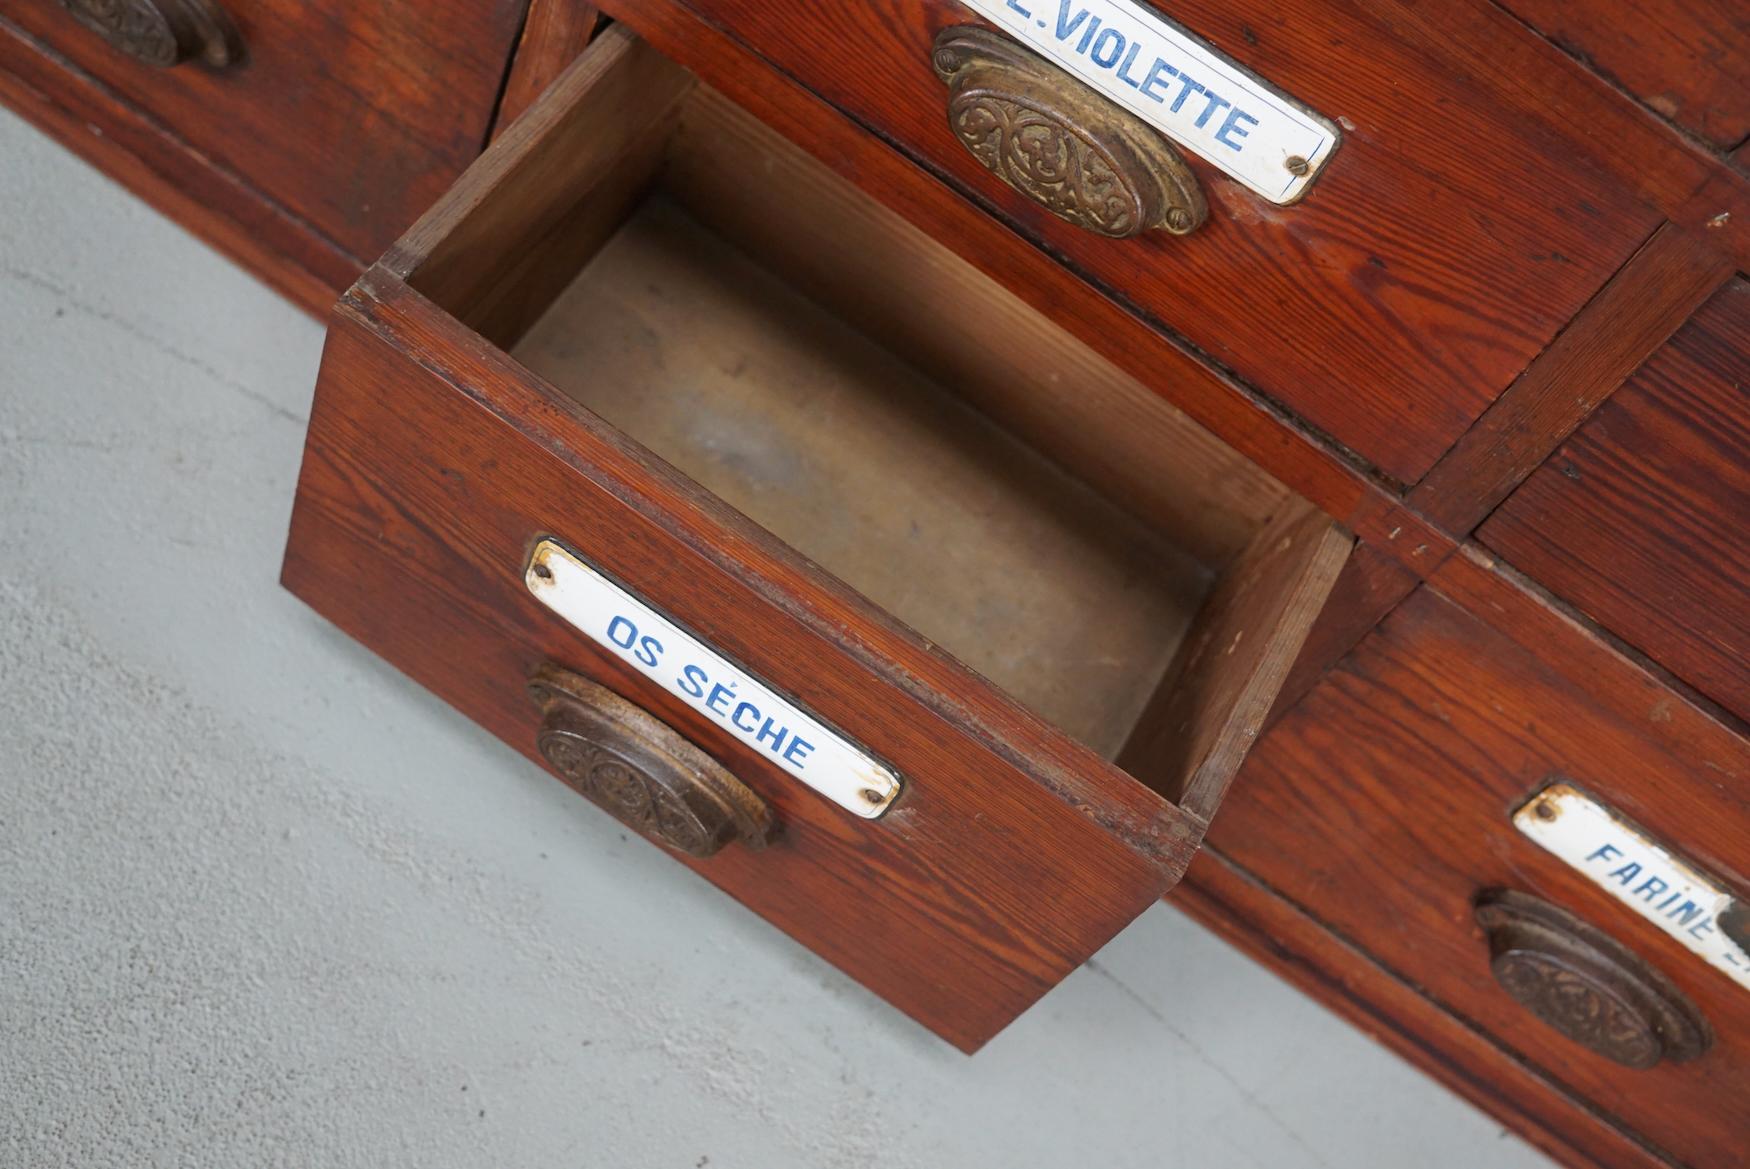 This apothecary bank of drawers was designed and made circa 1900 in Belgium. It was made from pitch pine with cast iron art nouveau style handles and enamel name plates for the contents. The cabinet has retained a rich patina with some natural